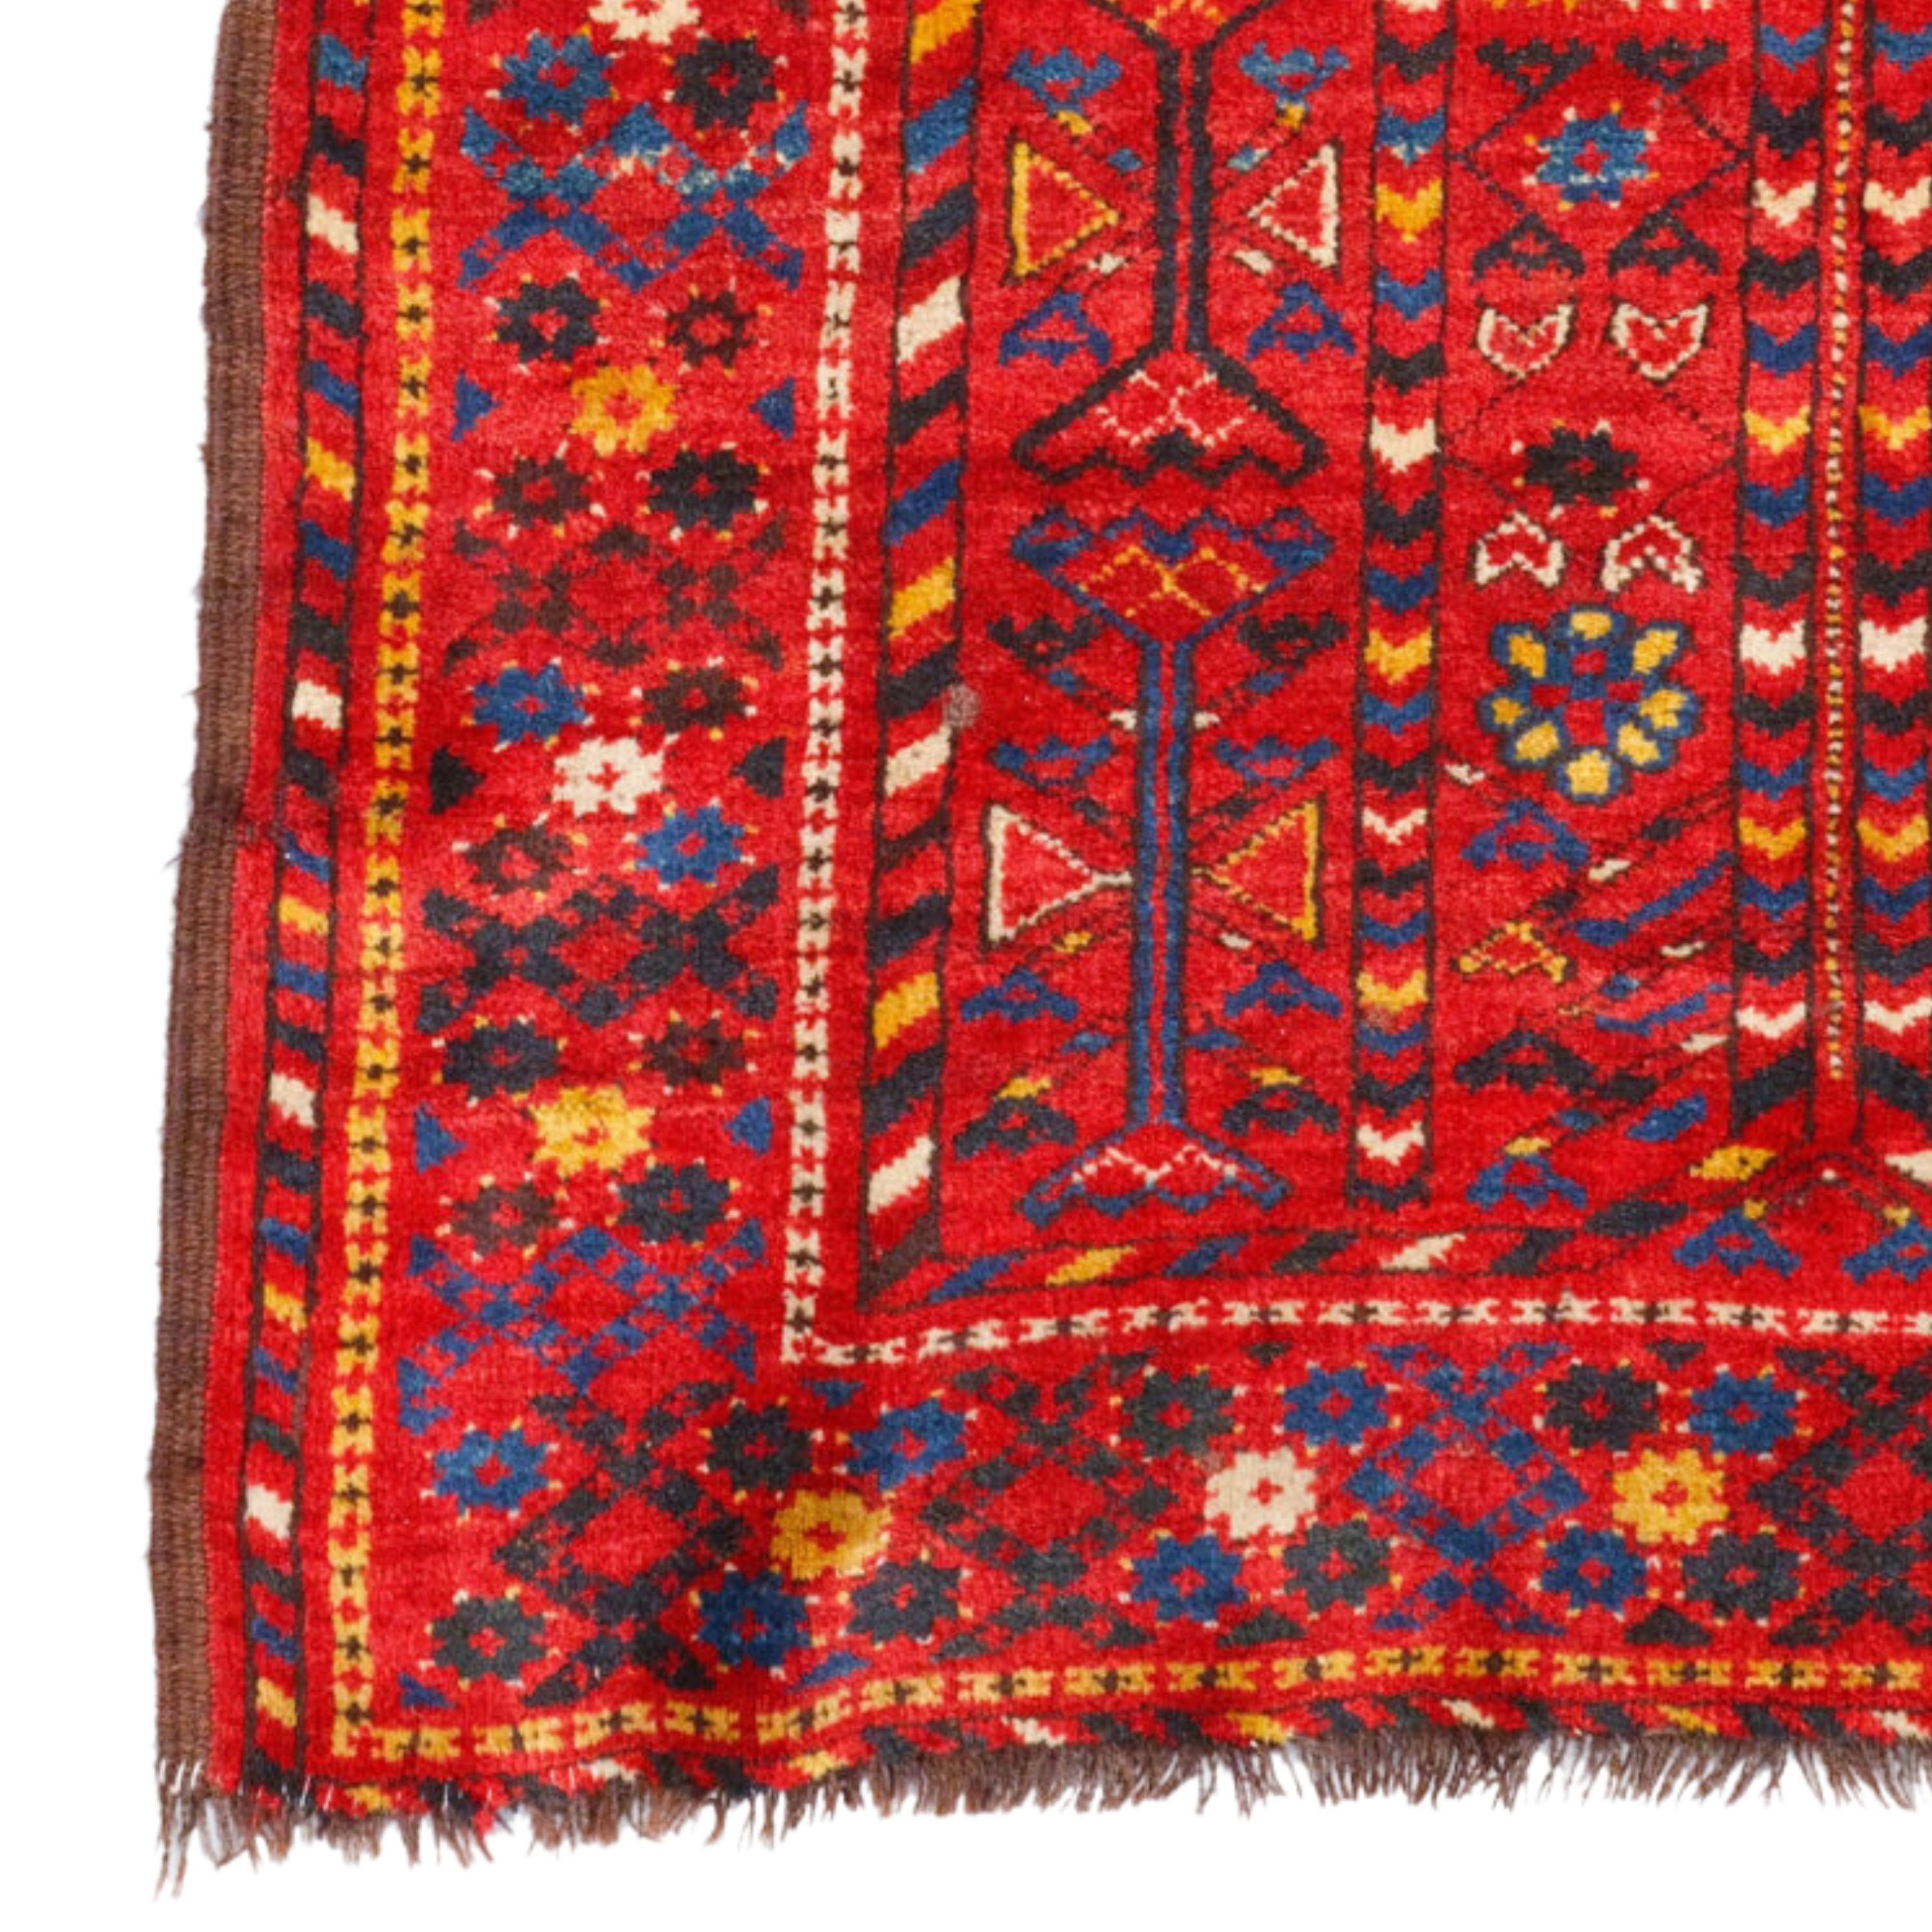 Antique Beshir Engsi - 19th Century Antique Beshir Engsi
Size: 109×206 cm (3,57 - 6,75 ft)

This antique Beshir Engsi rug is a work of art from the 19th century. This carpet is an ensi type carpet used by the Beshir tribe to decorate traditional